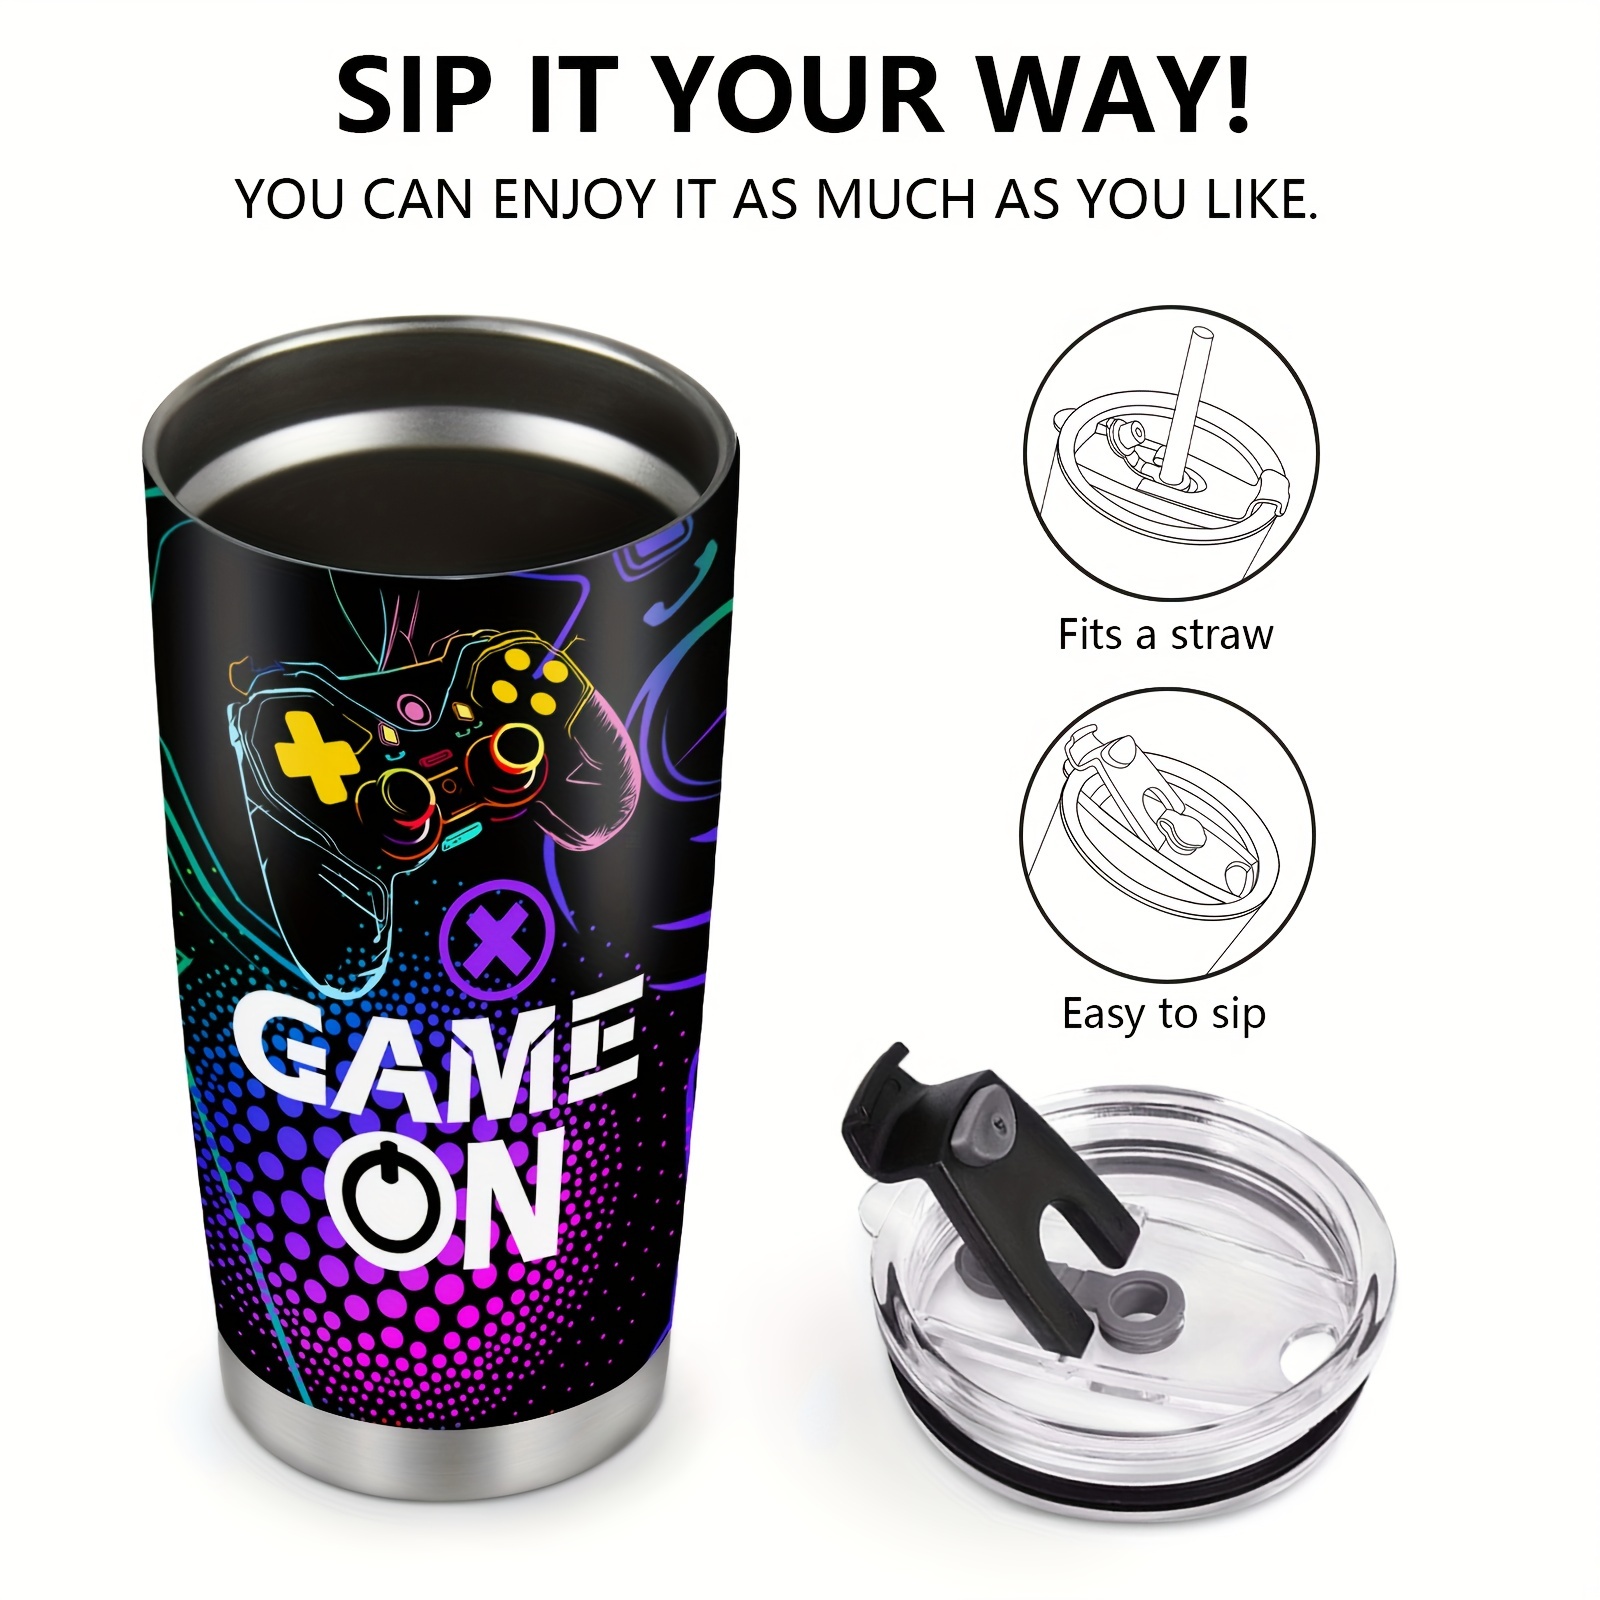 Gamer Gifts, Gifts for Gamers, Cool Gamer Gifts for Men Teen  Boys Boyfriend, Gaming Gifts, Gamer Gift Ideas, Video Game Gifts, Gamer  Girl Gifts, Gifts for Game Lovers Stainless Steel